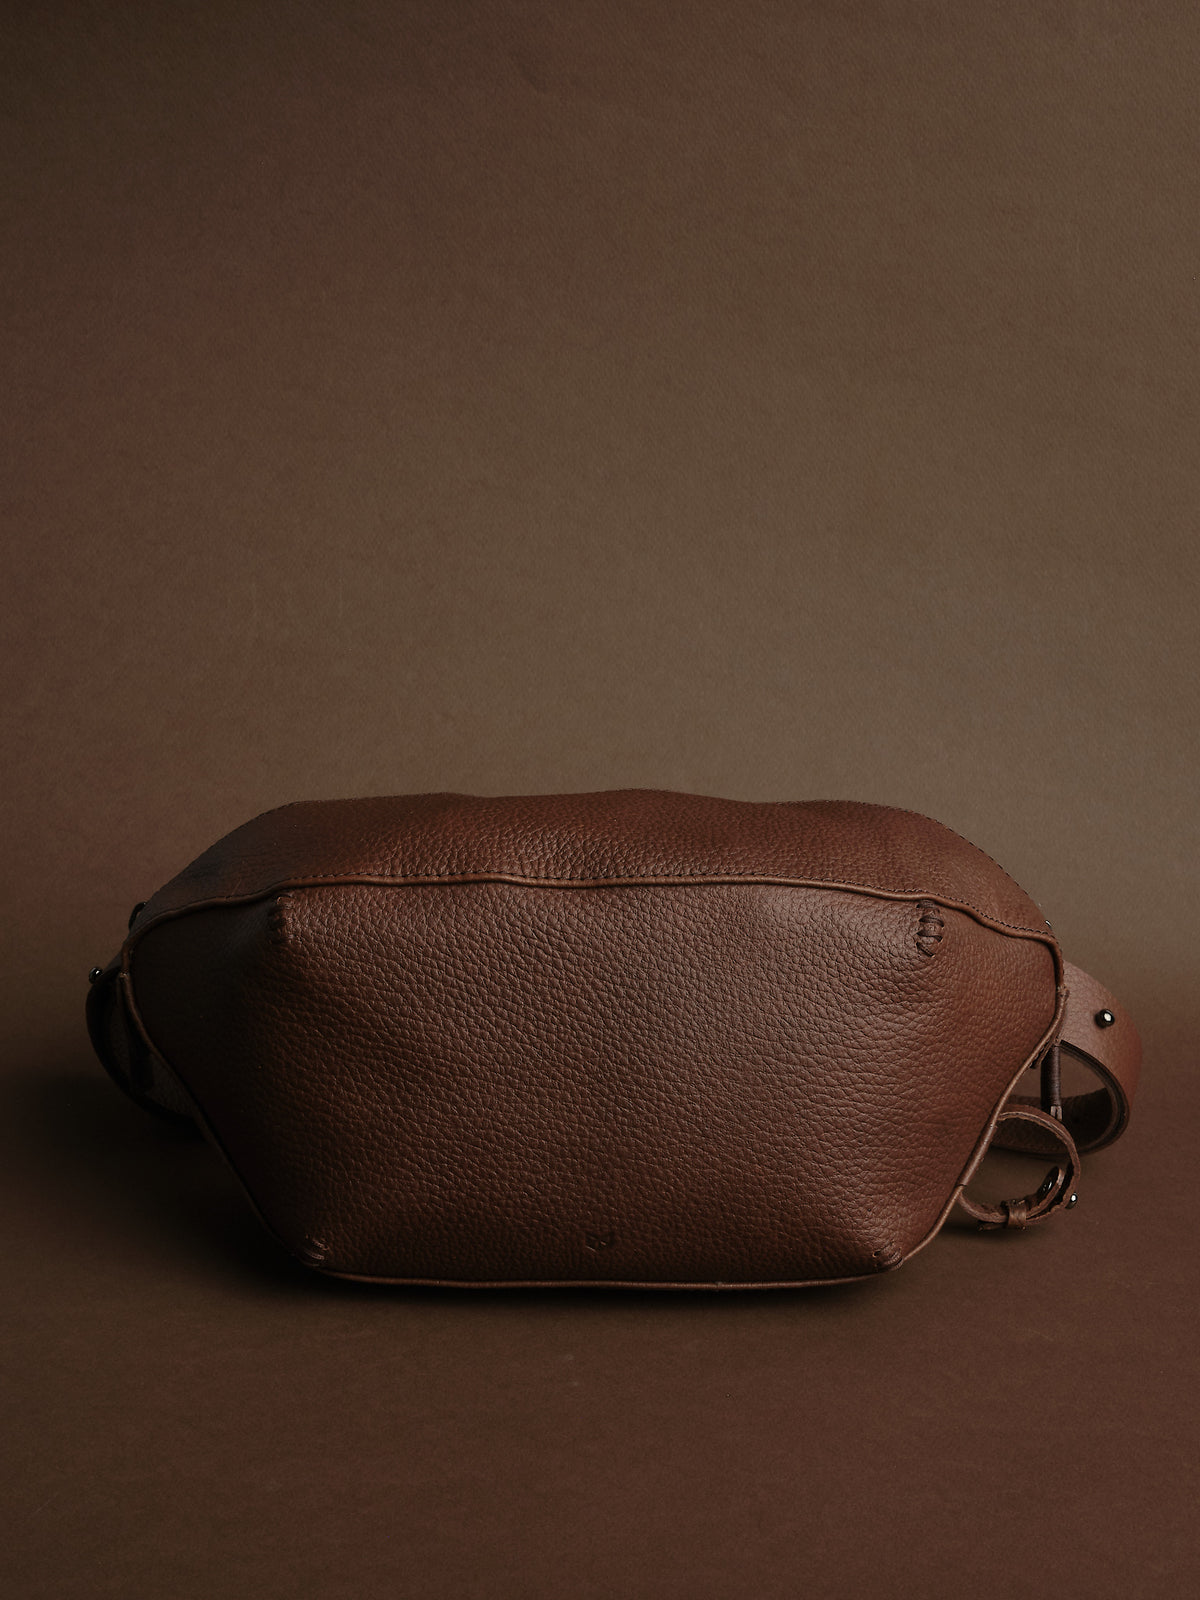 Leather Sling Bag. Fanny Pack Brown by Capra